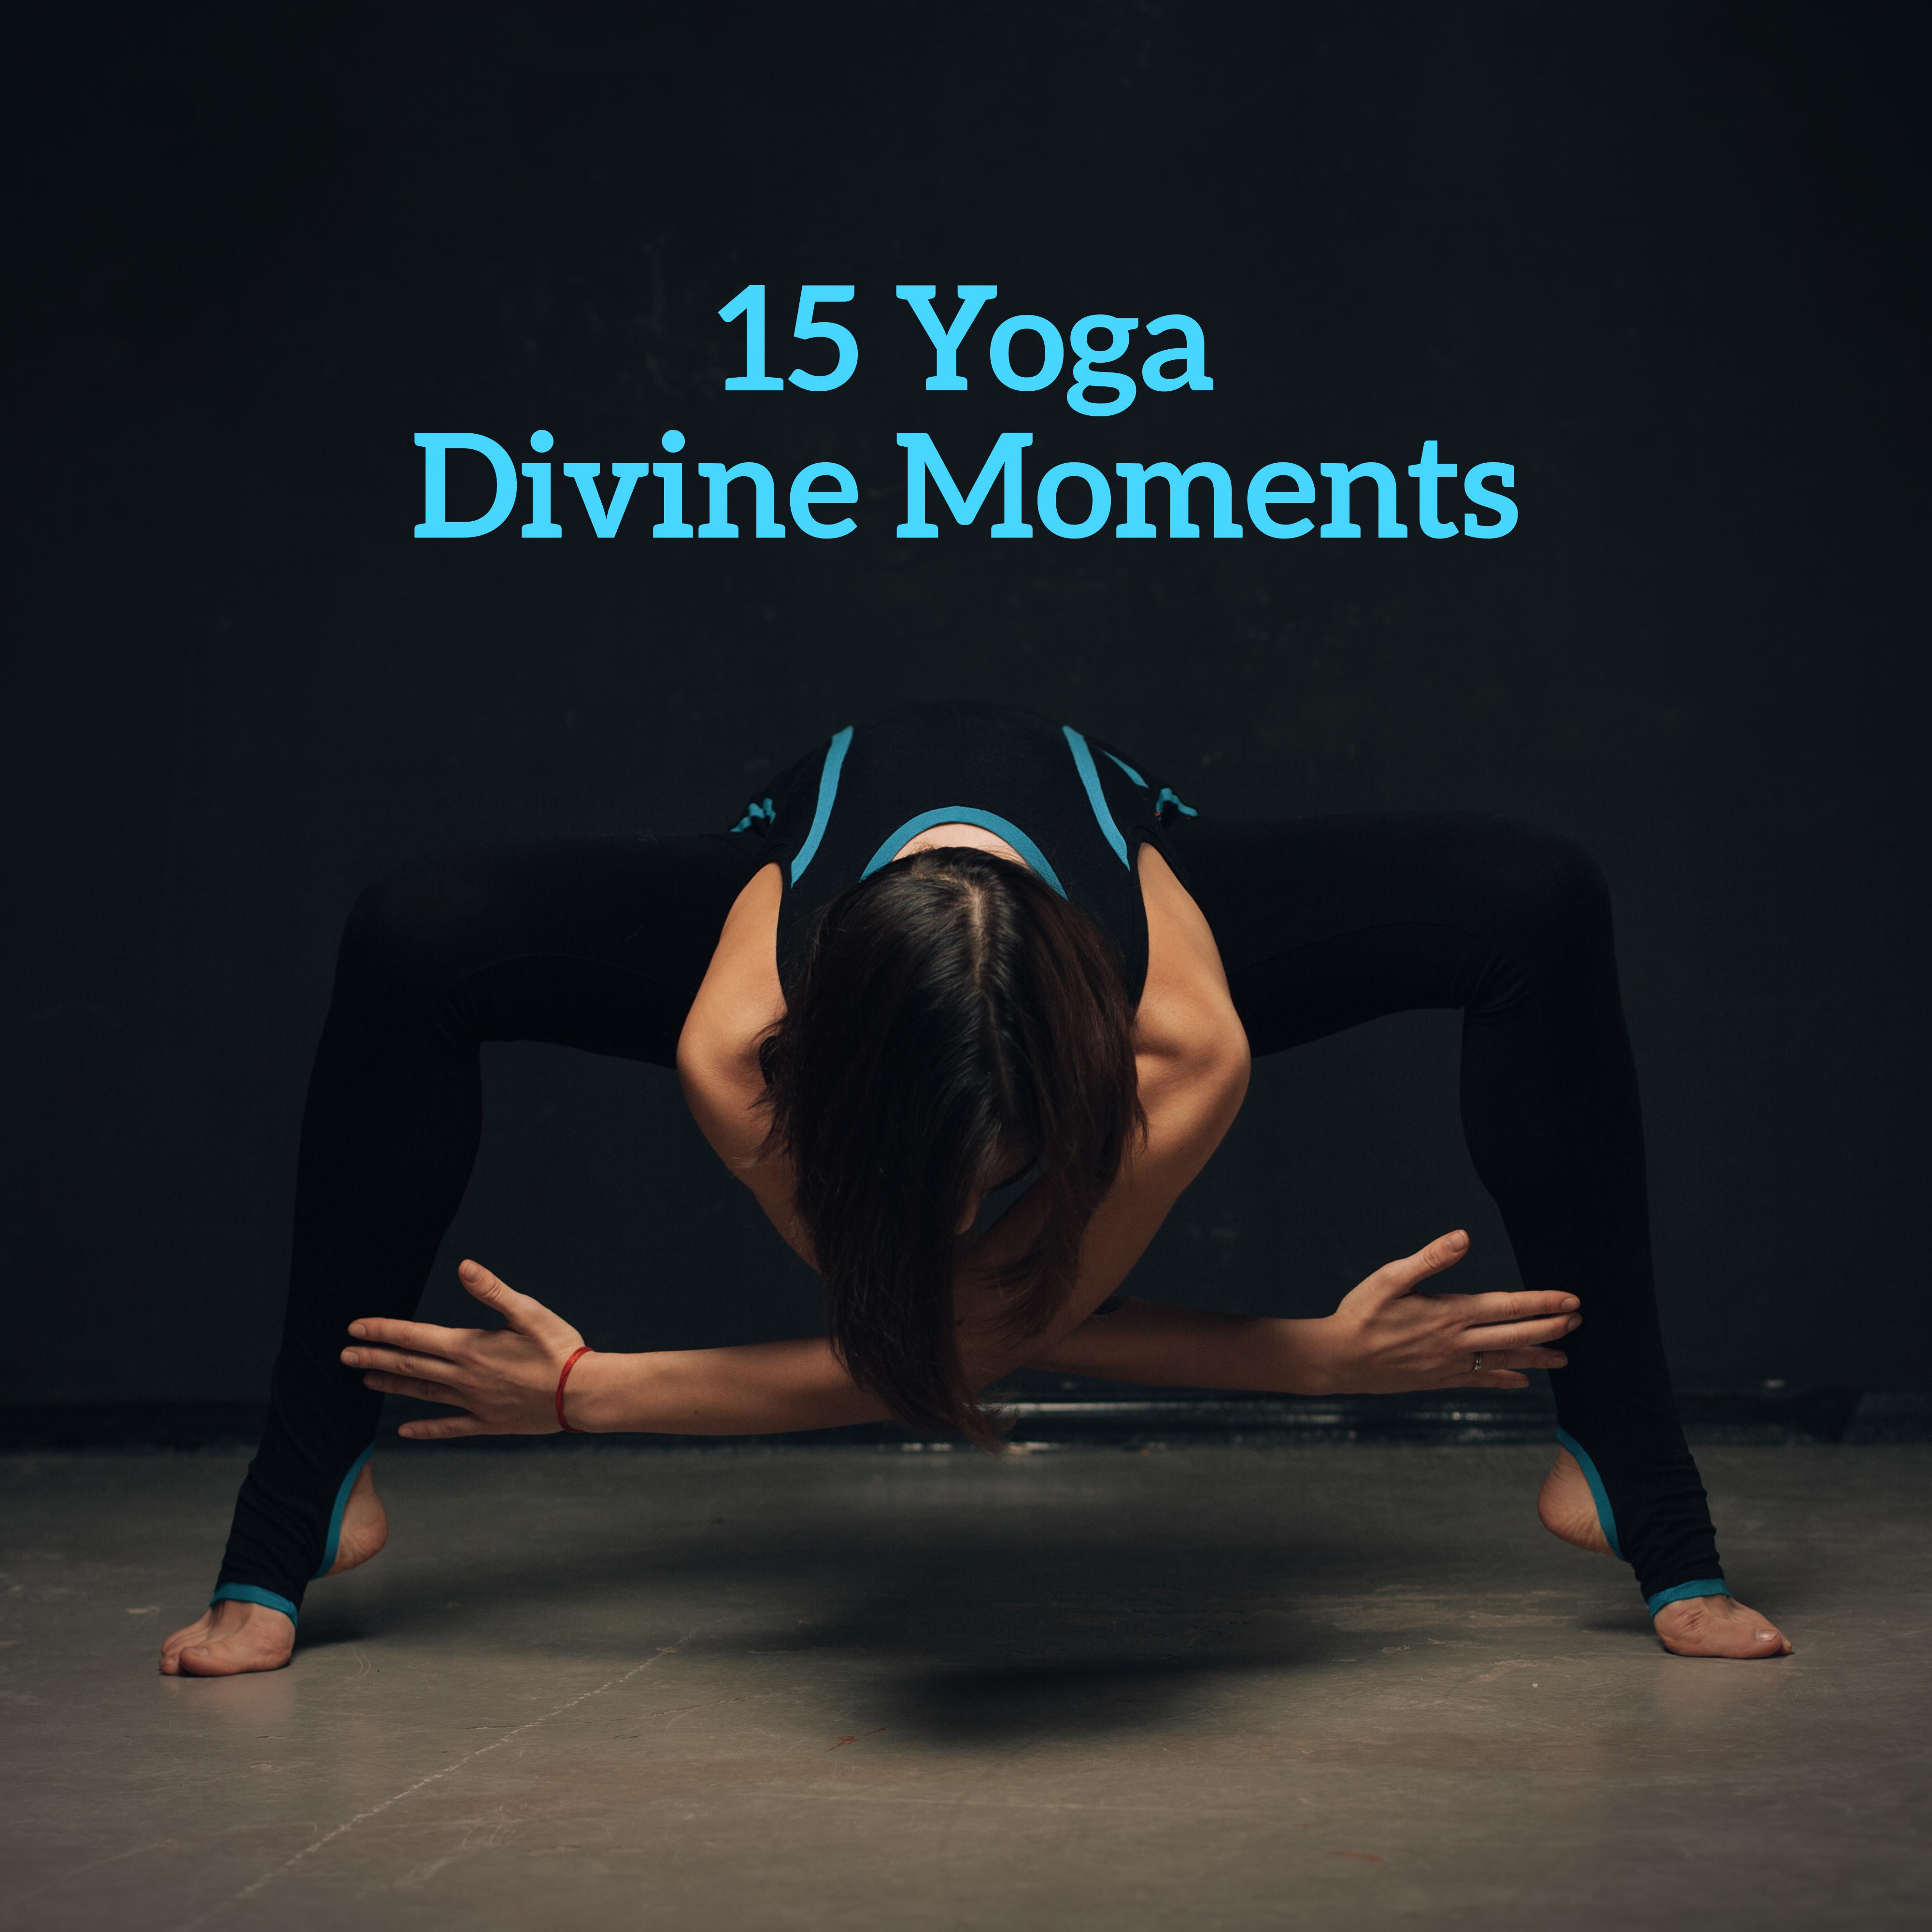 15 Yoga Divine Moments: New Age Ambient 2019 Music for Total Meditation & Relaxation Experience, Third Eye Opening, Chakra Healing, Mantra Zen, Inner Bliss